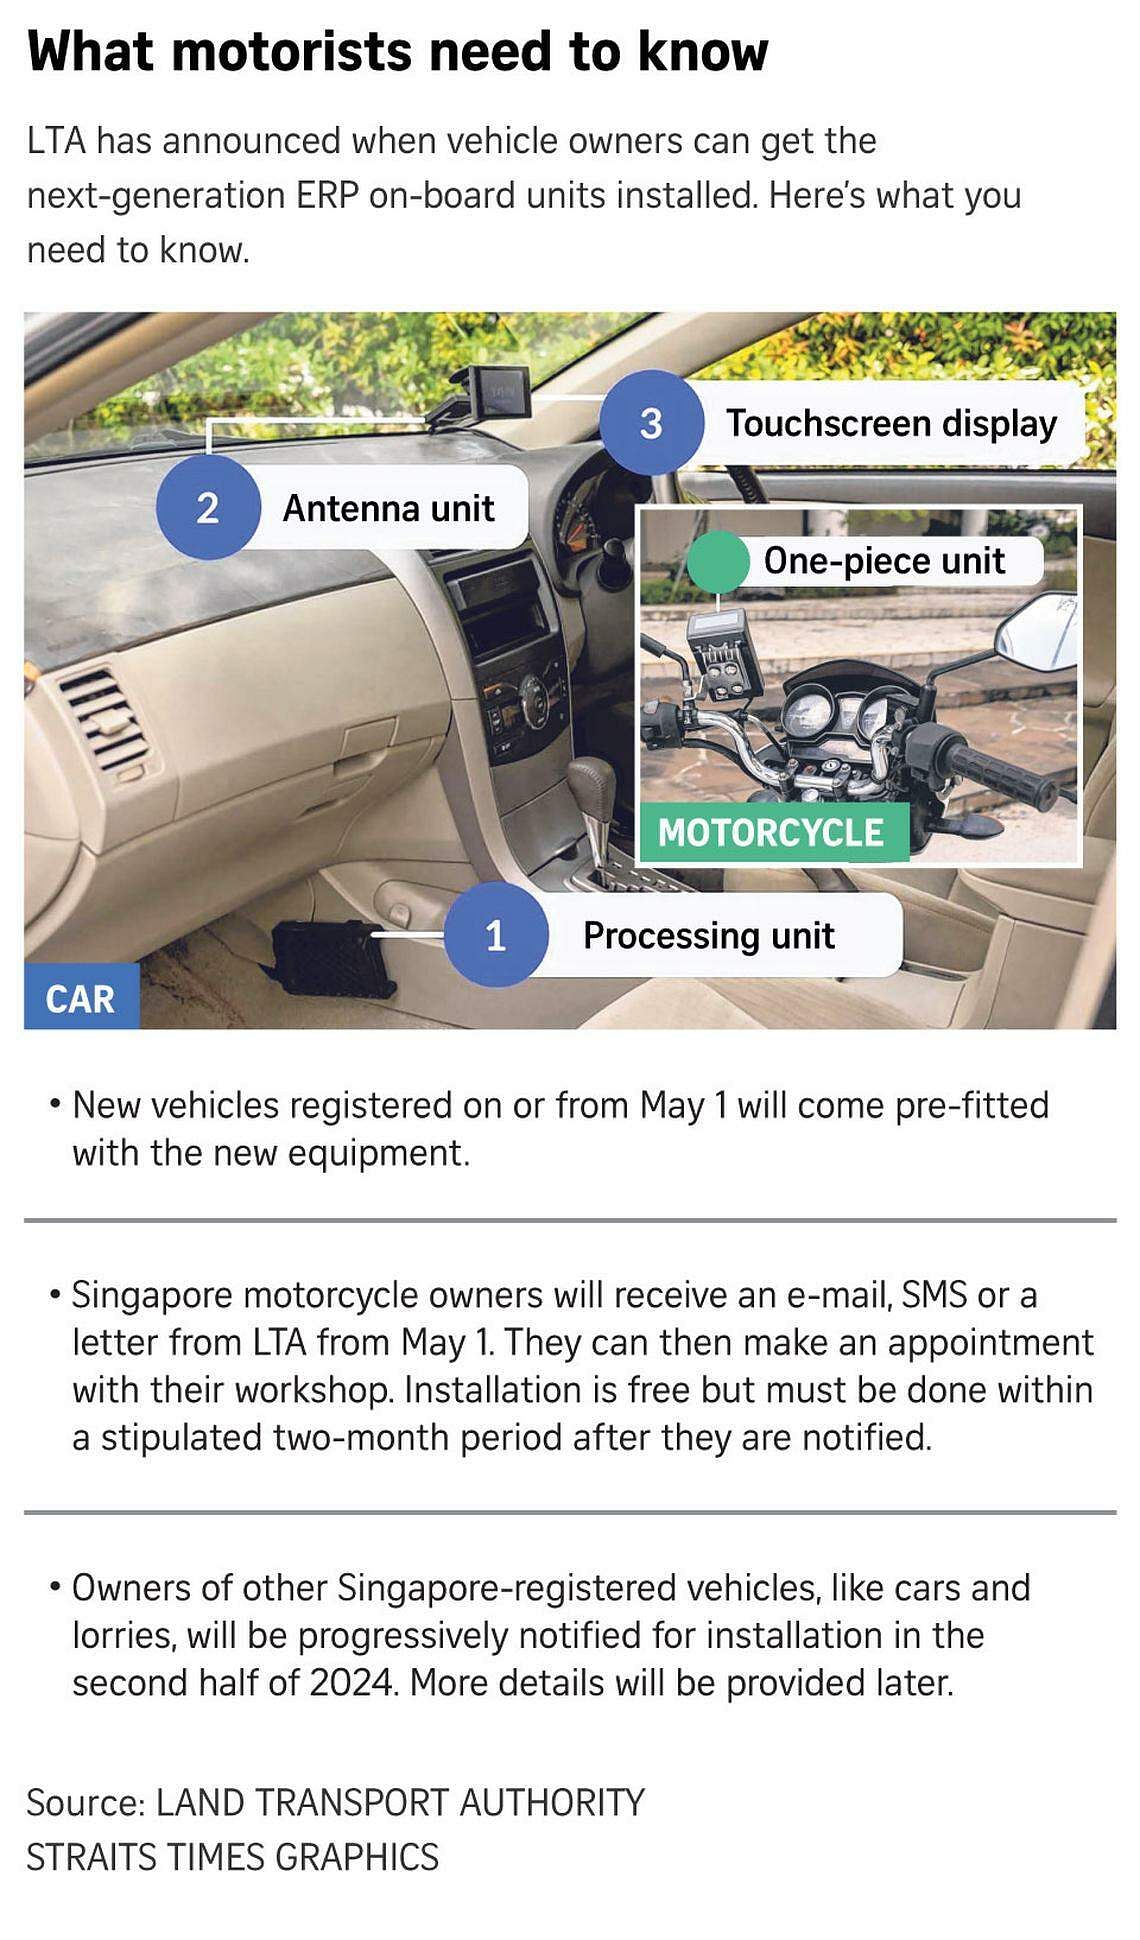 Motorists can opt to install next-gen ERP processing units in driver’s footwell: LTA